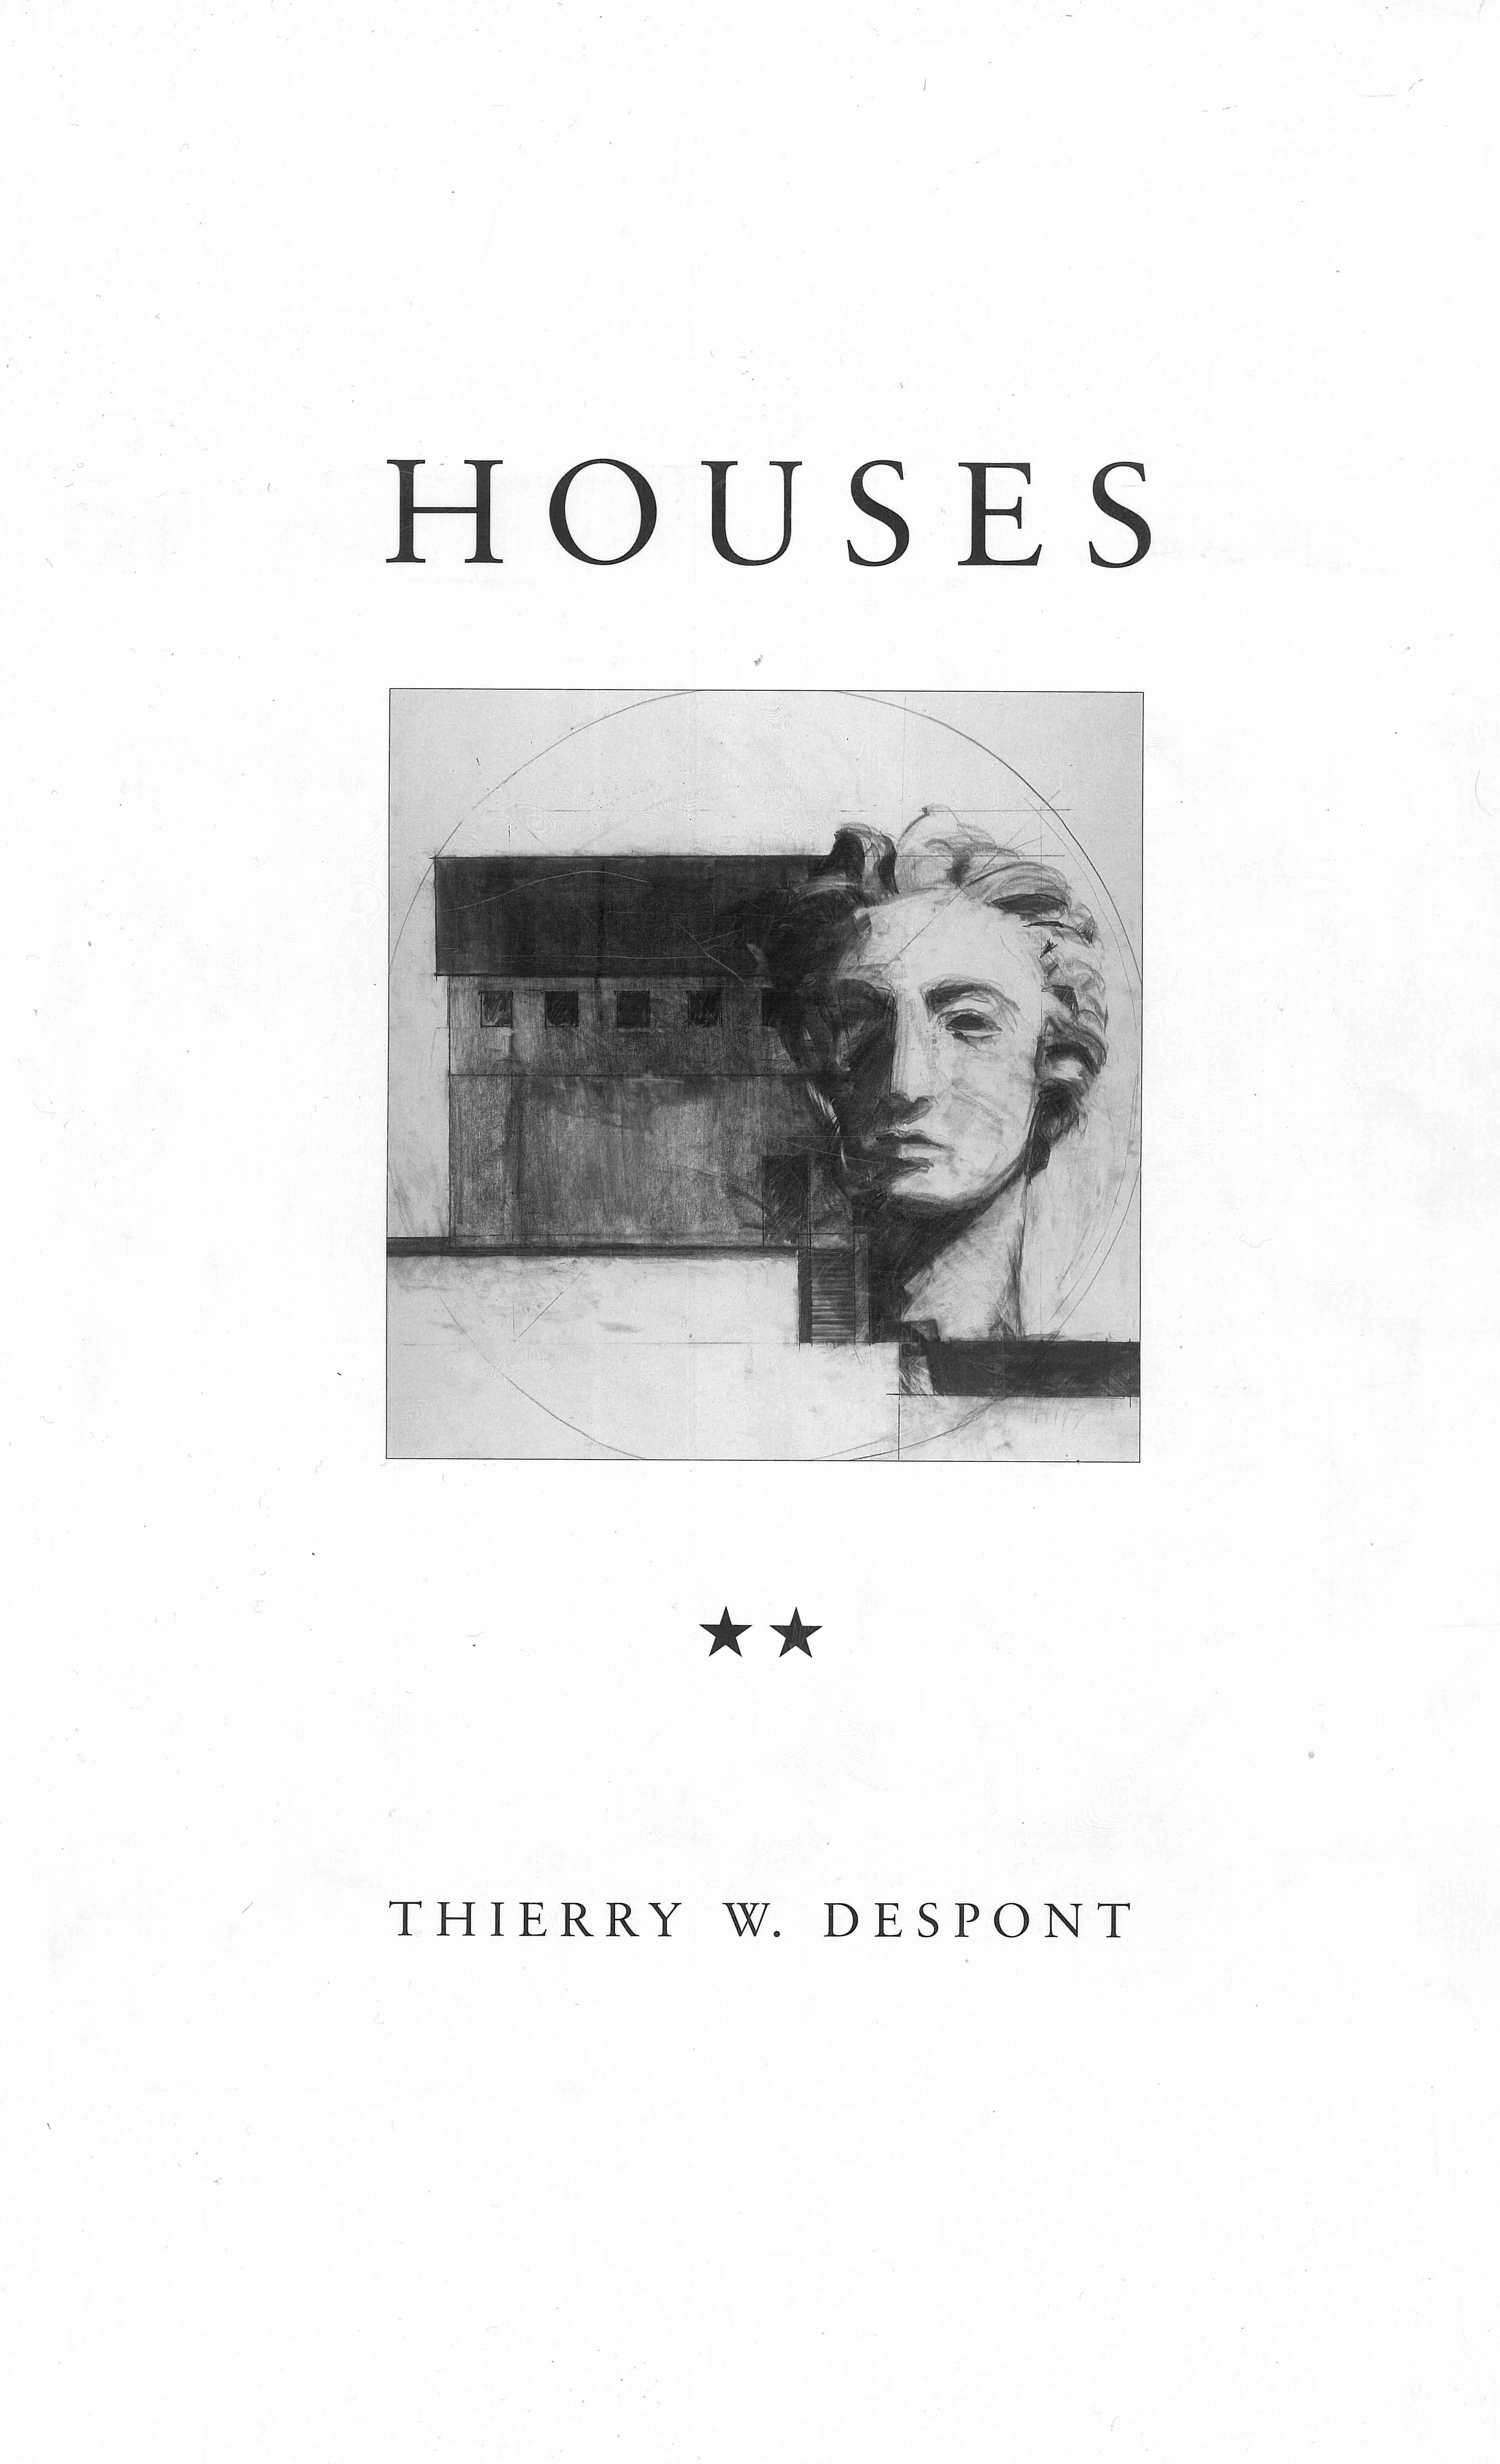 HOUSES * * by Thierry W. Despont - (book)